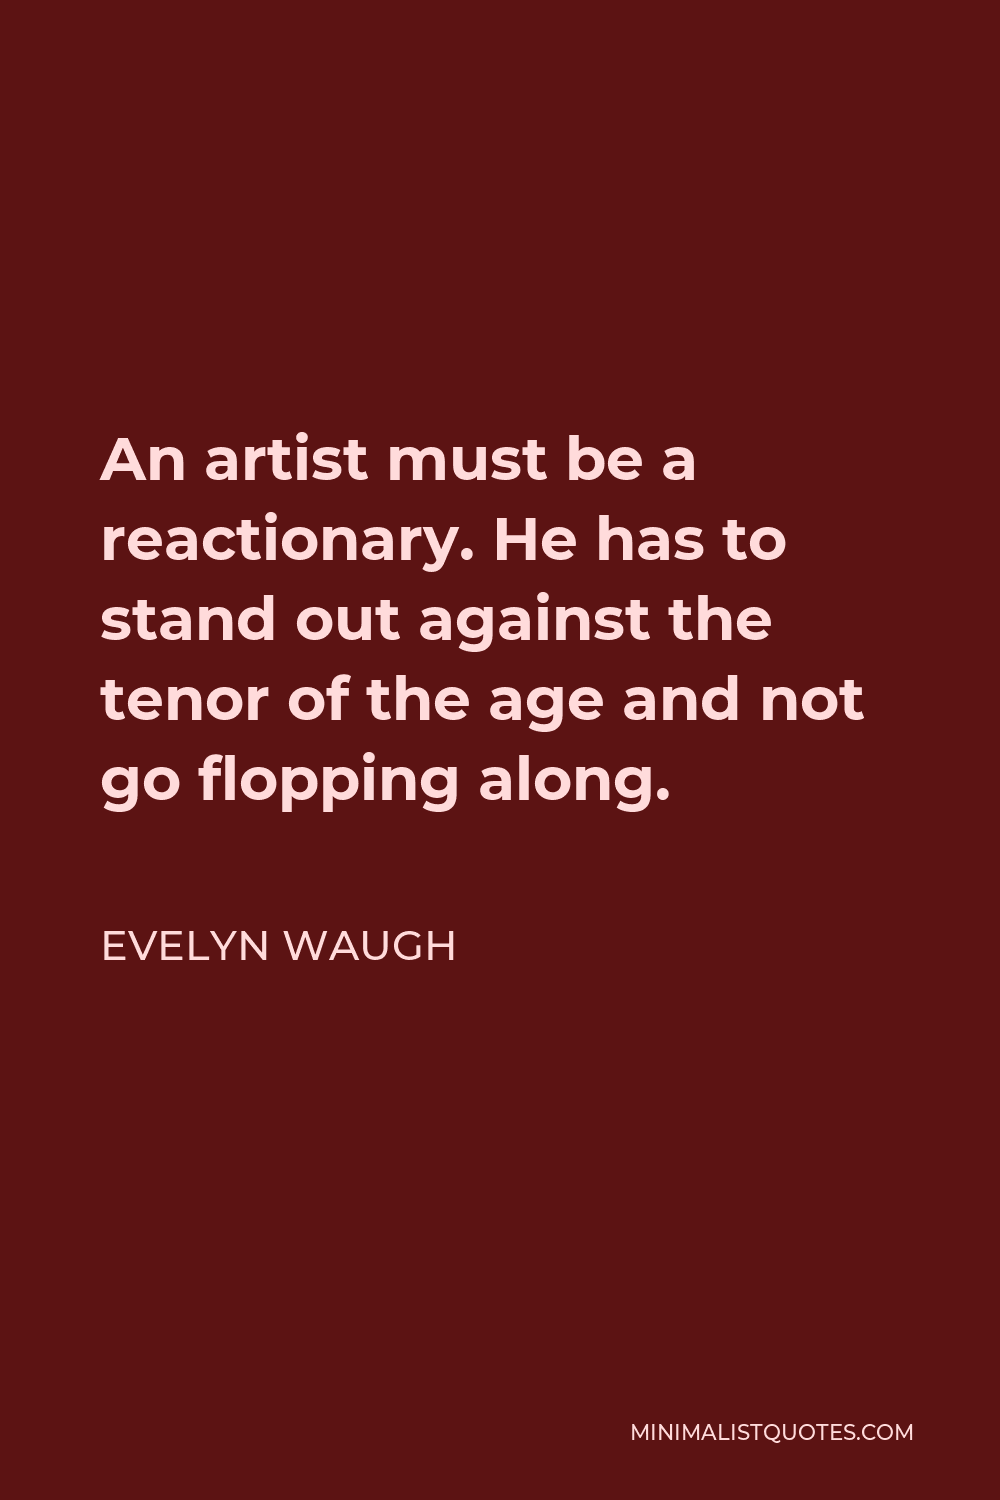 Evelyn Waugh Quote - An artist must be a reactionary. He has to stand out against the tenor of the age and not go flopping along.